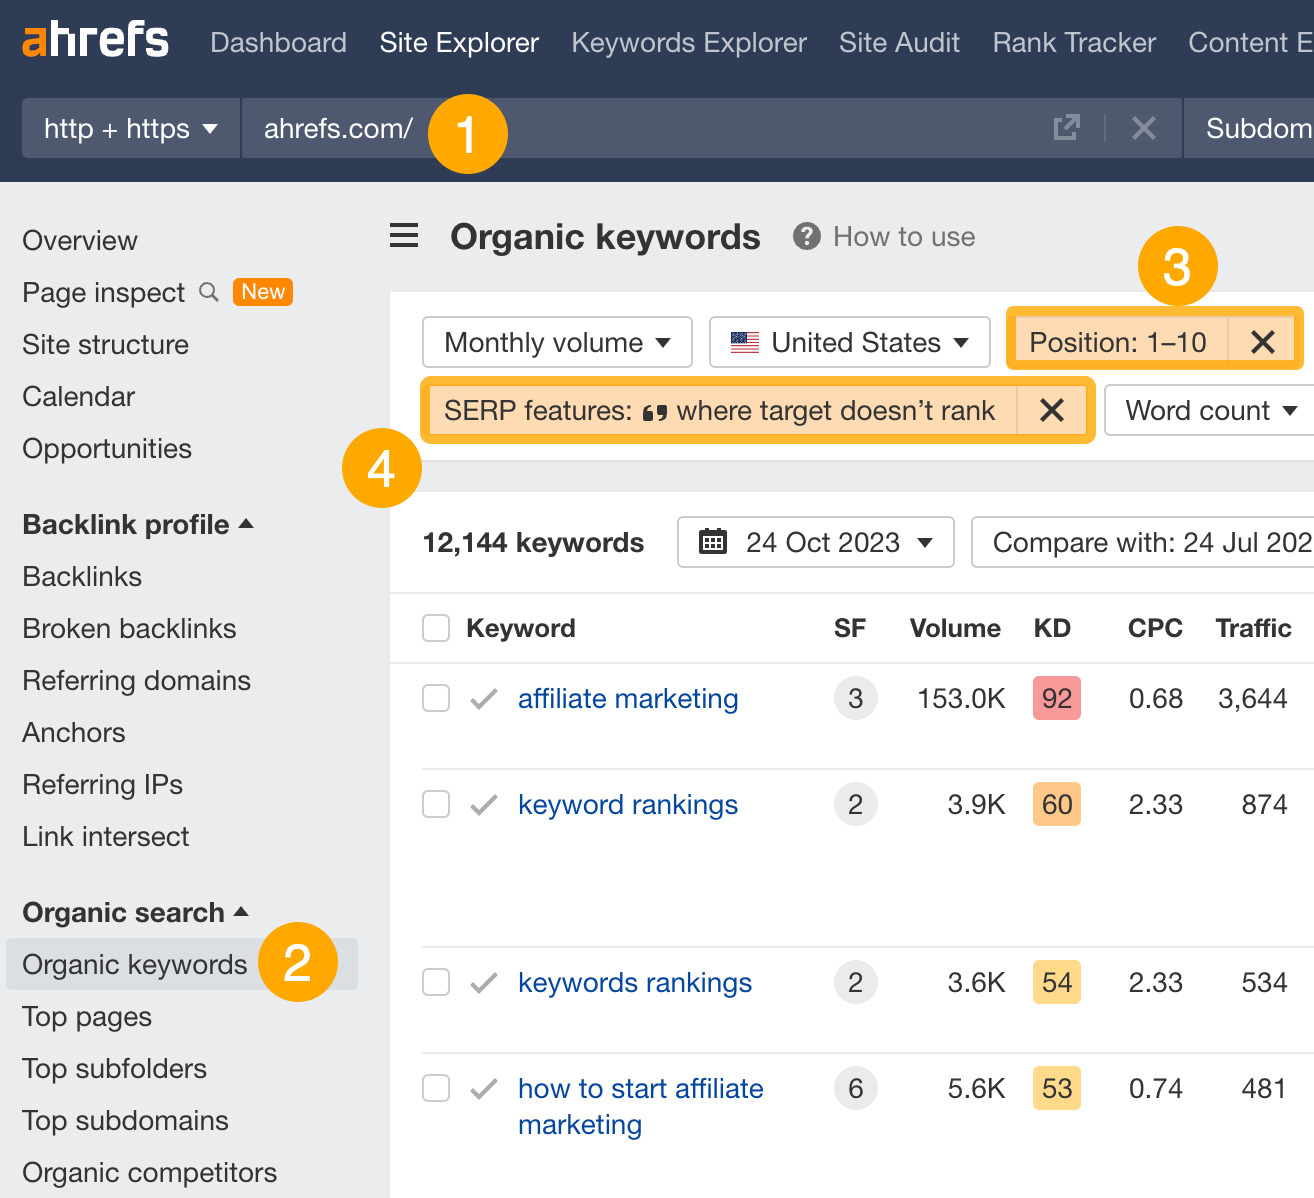 Low-hanging featured snippet opportunities for our website, via Ahrefs' Site Explorer